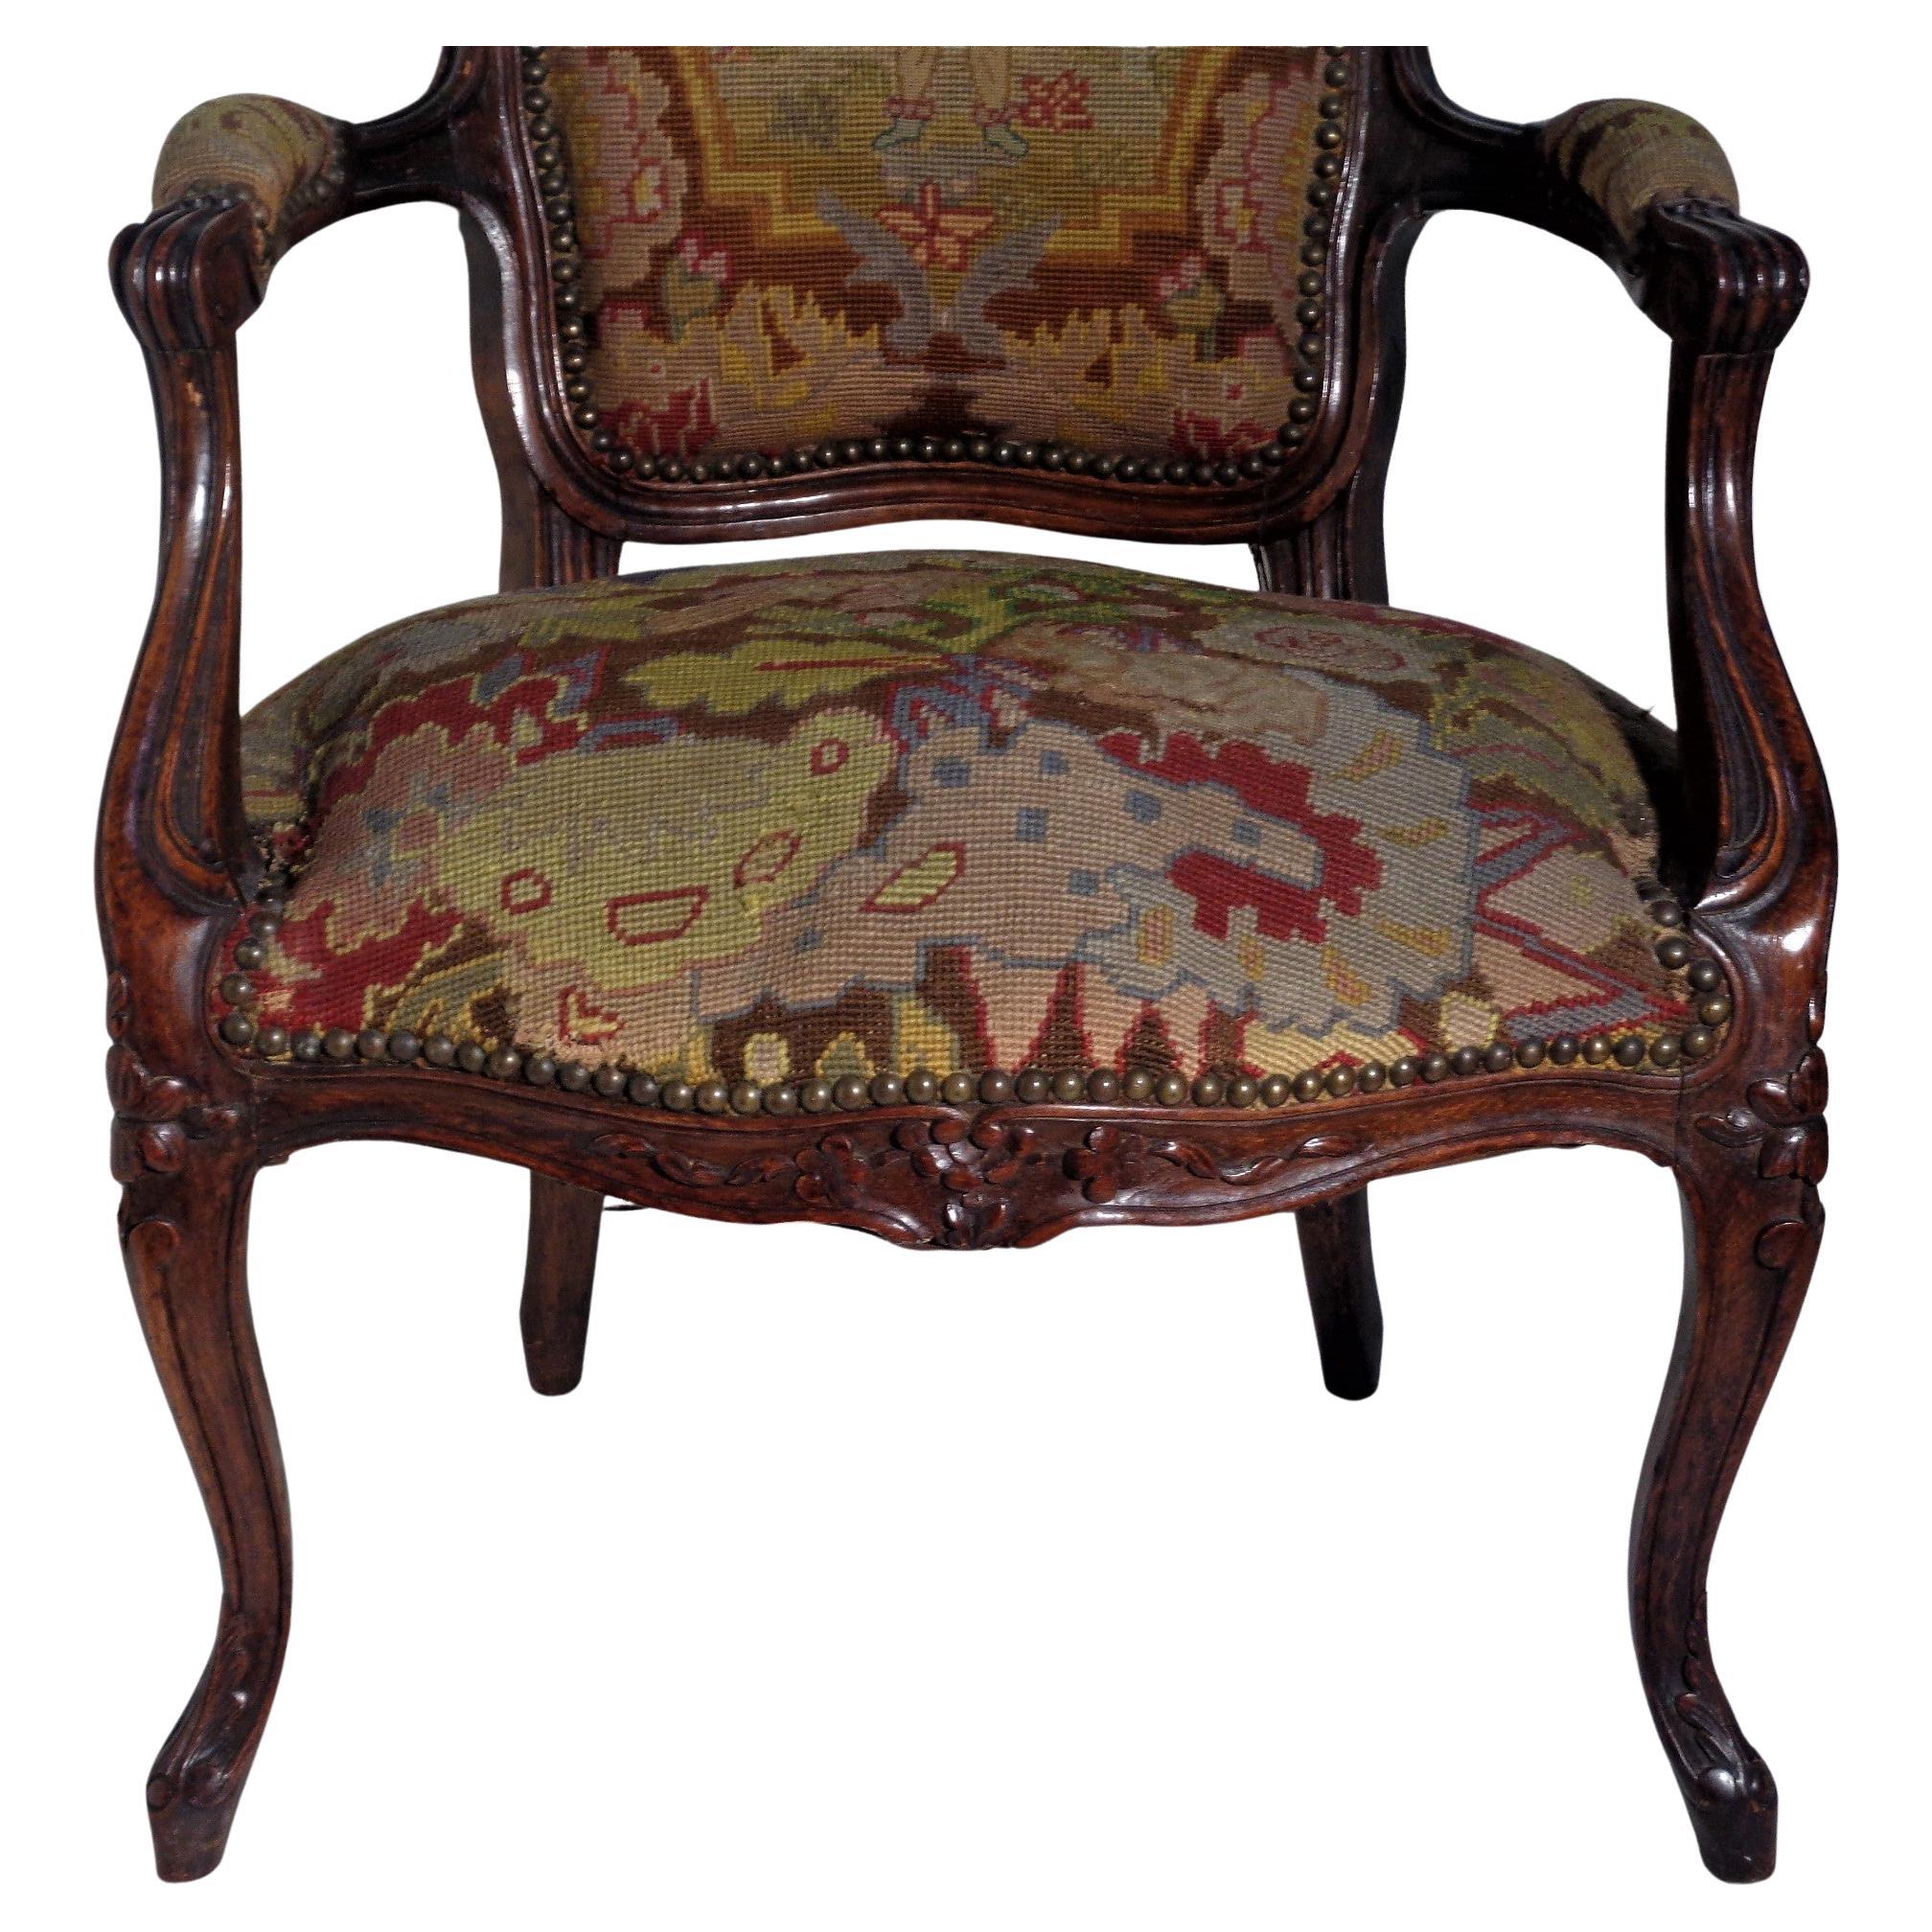 Hand-Woven 19th Century Louis XV Style Carved Beech Wood Fauteuil Grospoint Tapestry For Sale